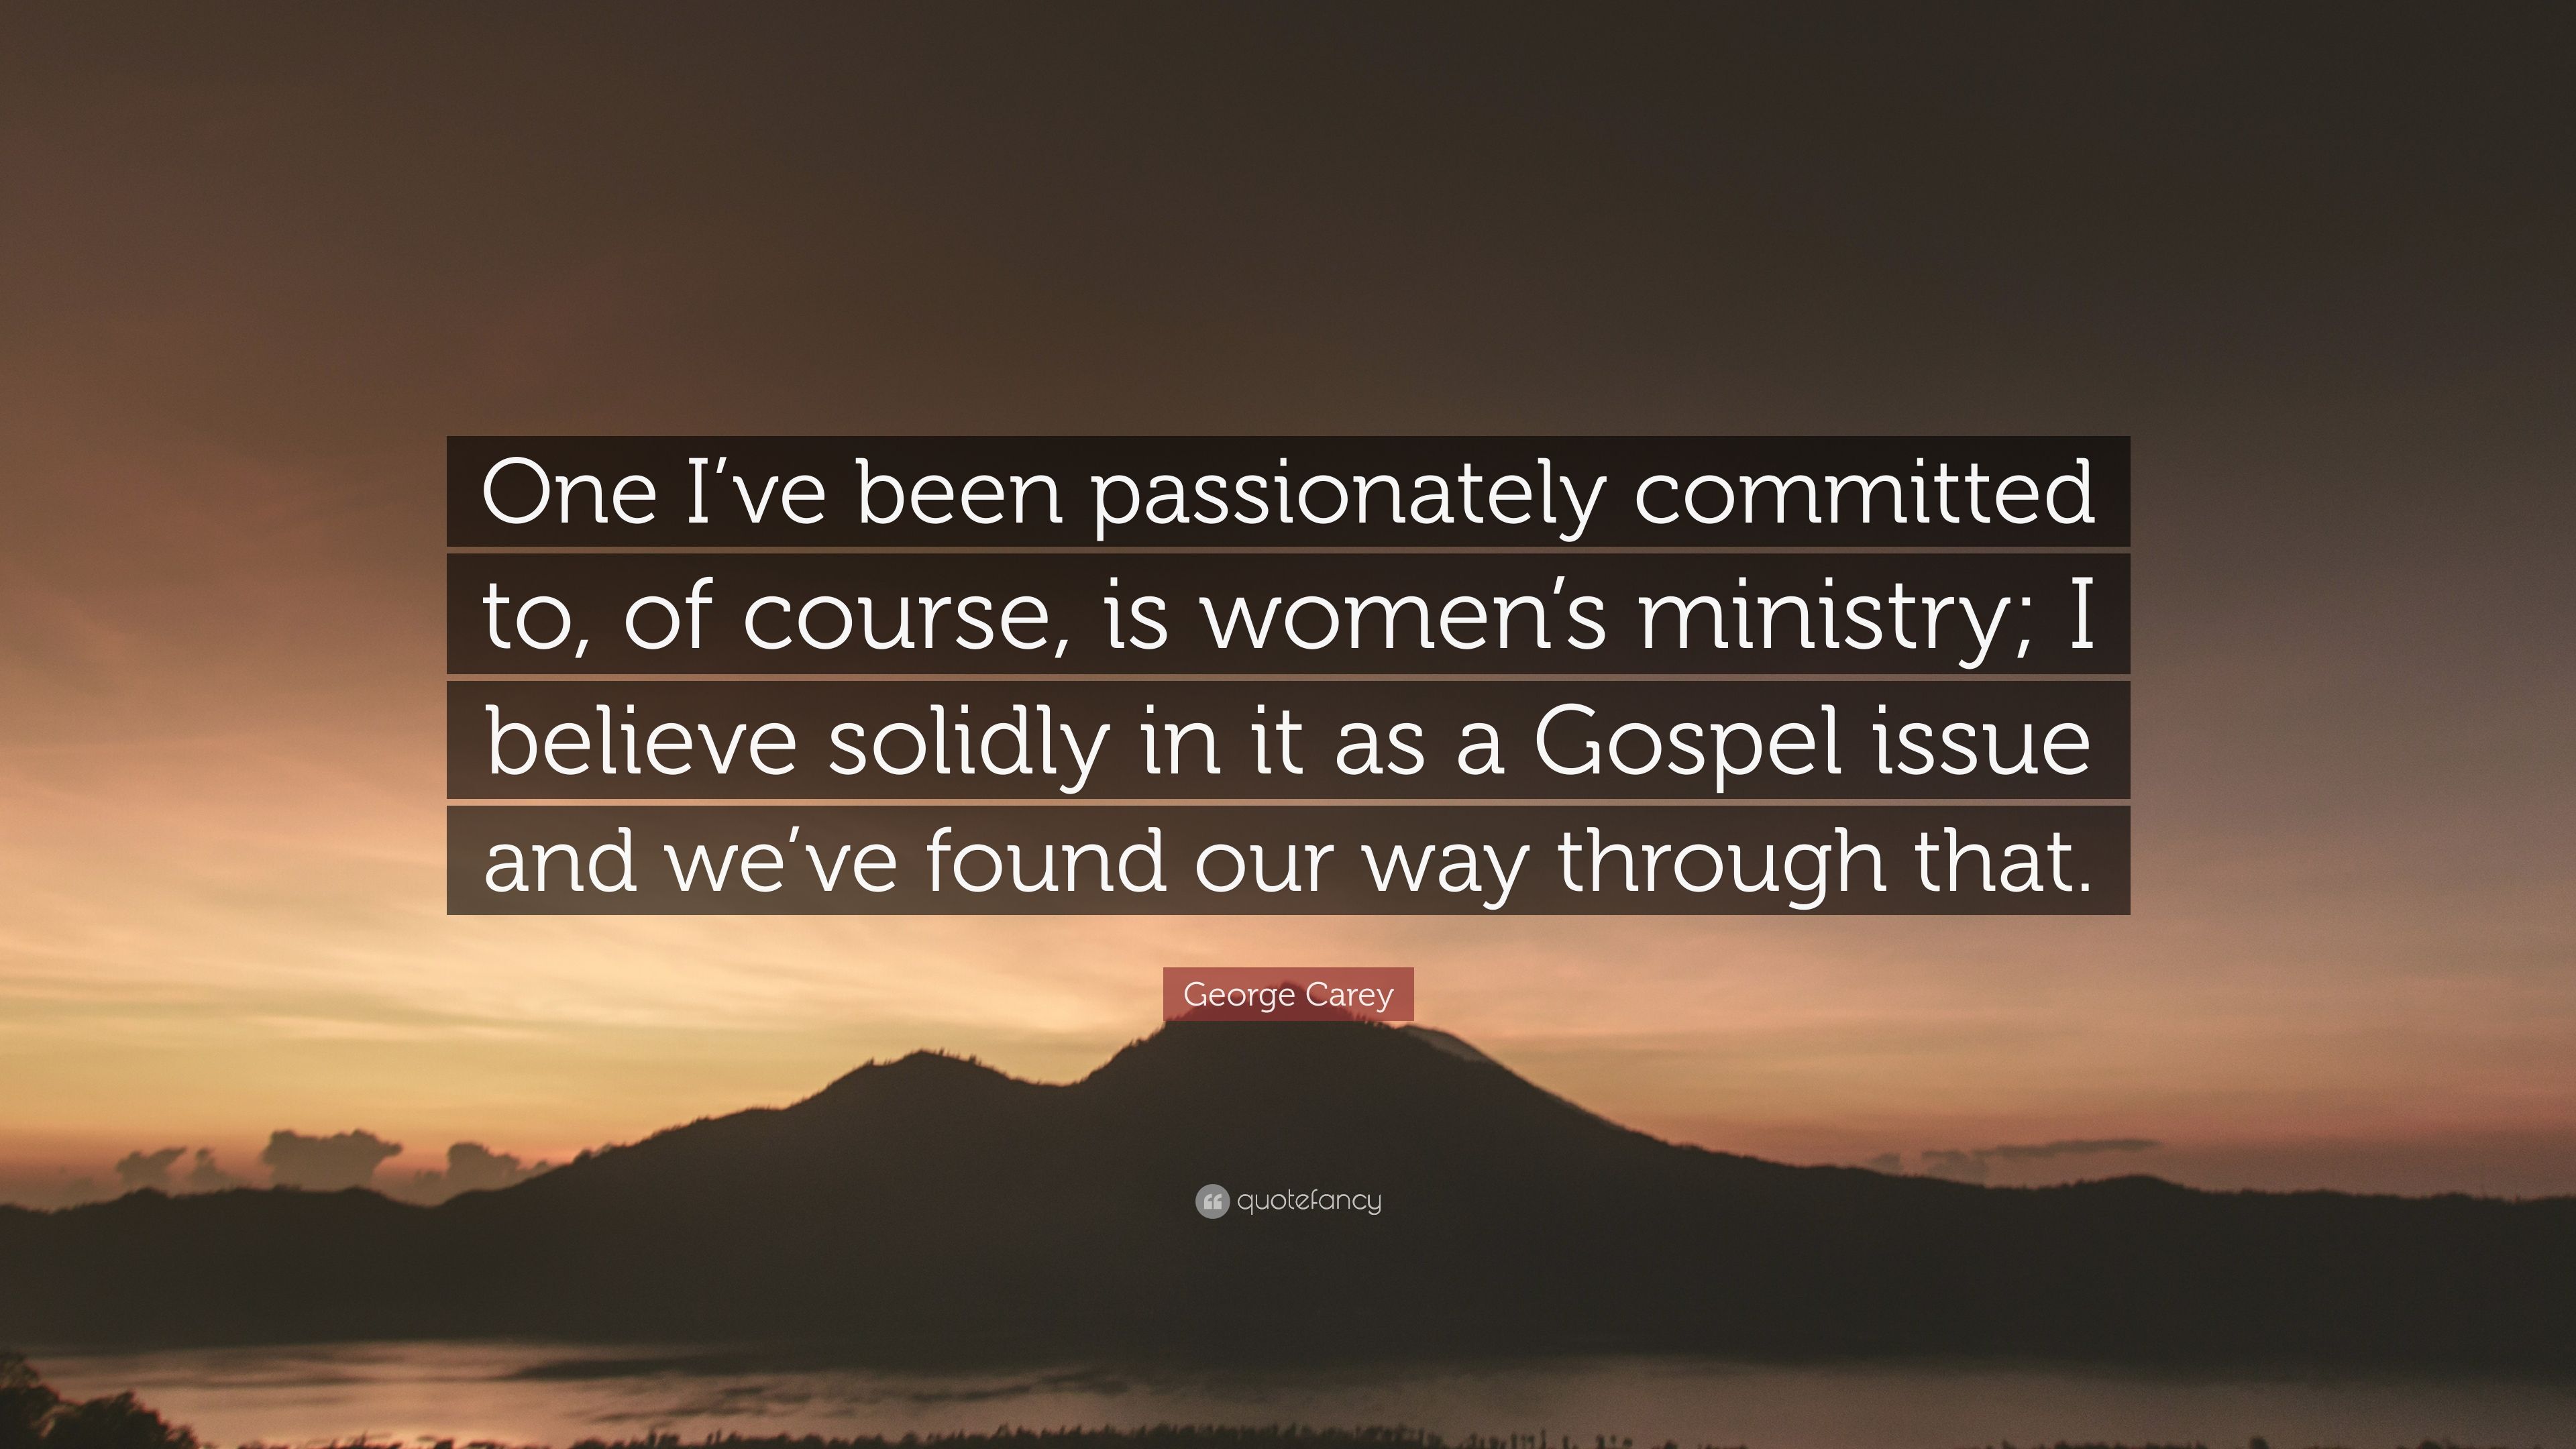 George Carey Quote: “One I've been passionately committed to, of course, is women's ministry; I believe solidly in it as a Gospel issue and w.” (7 wallpaper)